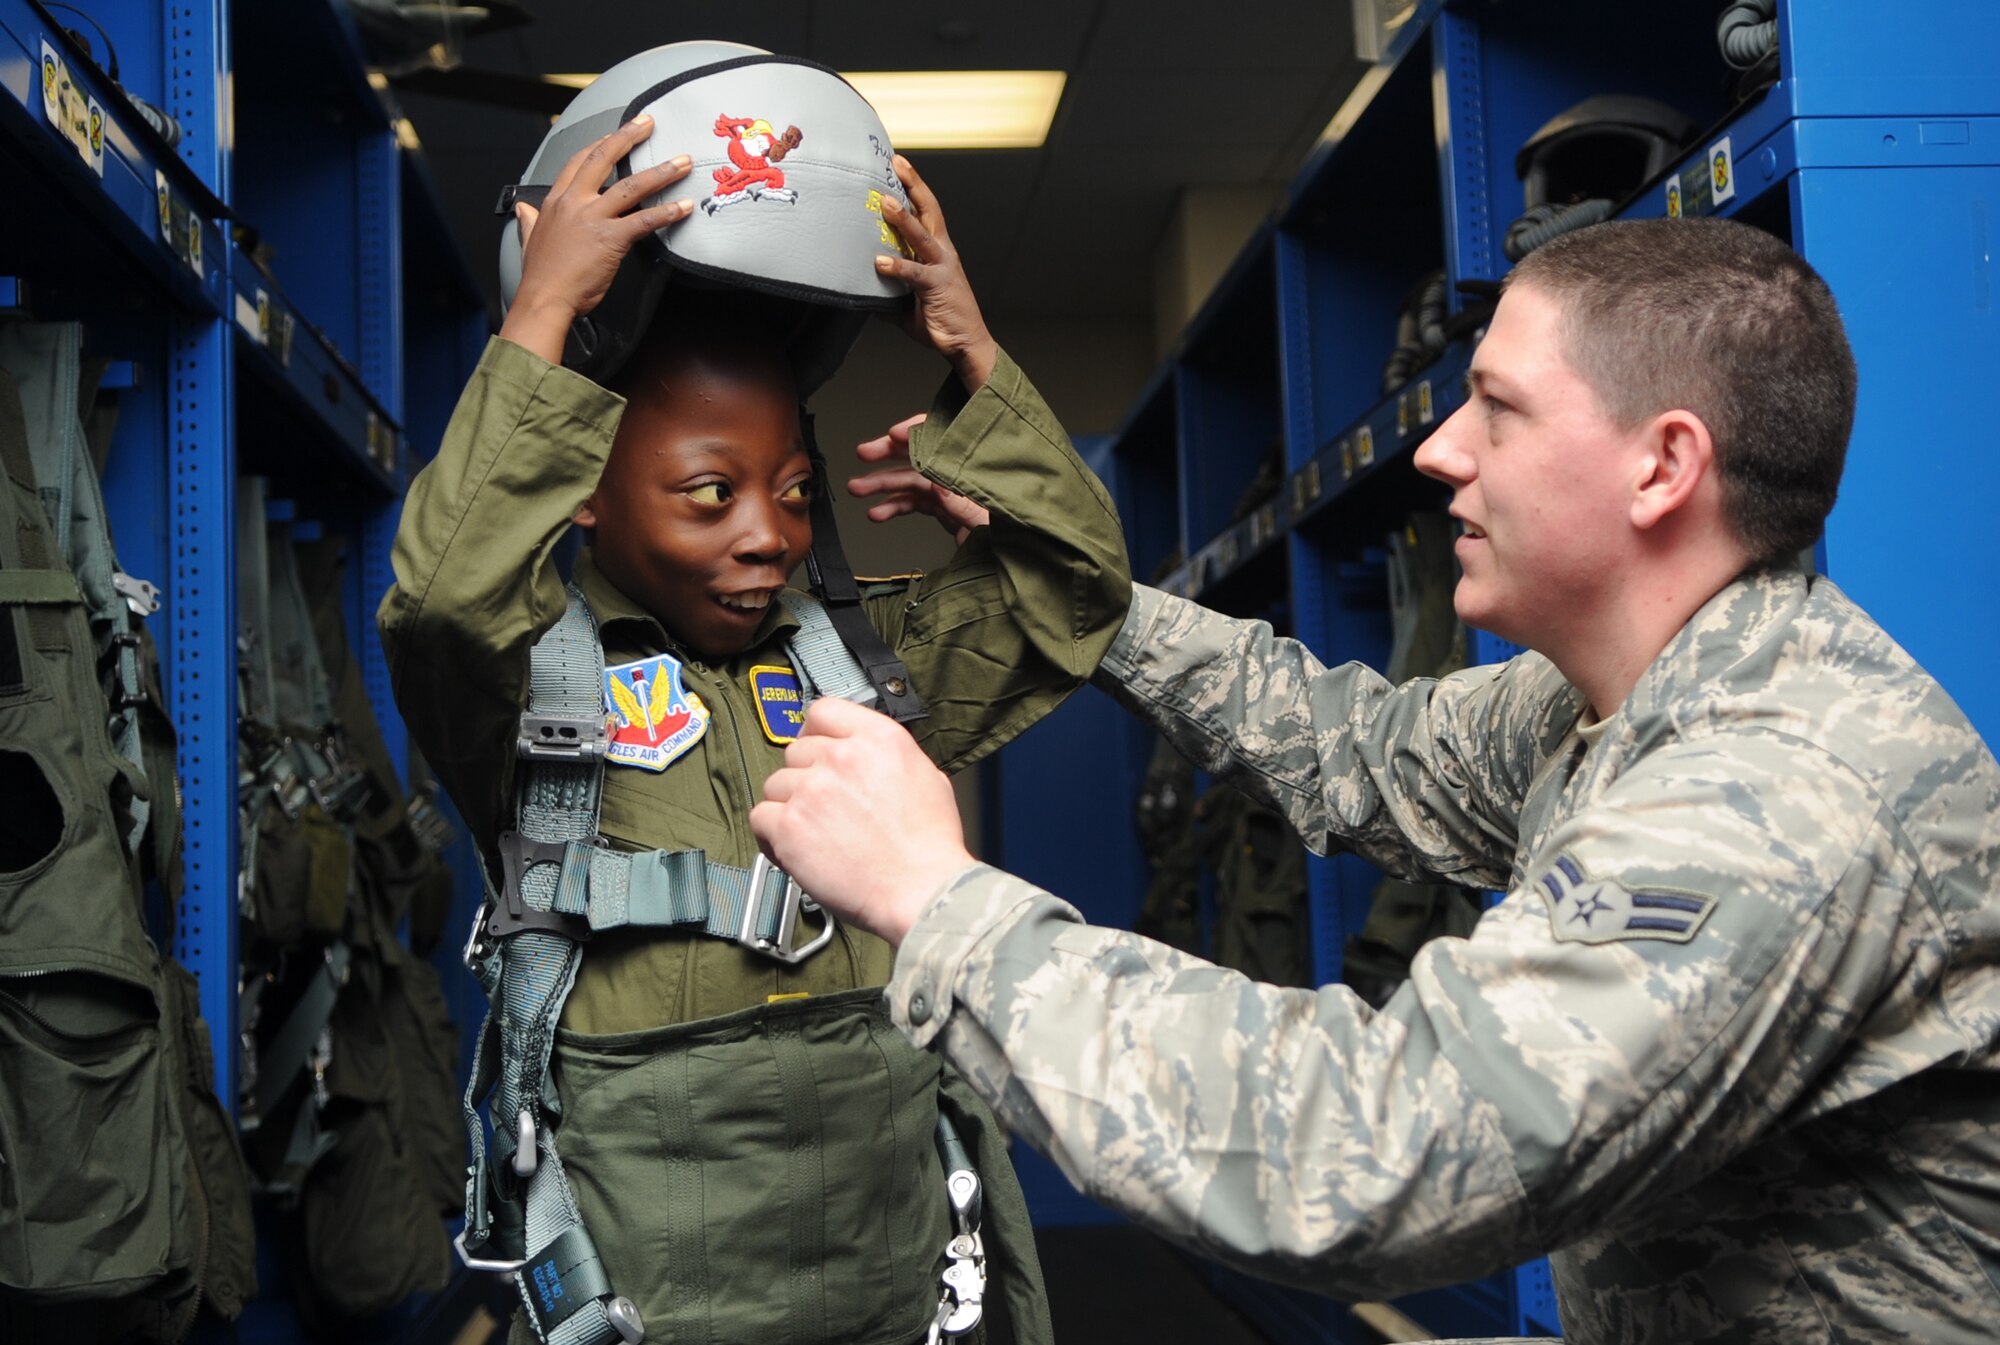 Airman 1st Class Luke Locken, a 4th Operations Support Squadron aircrew flight equipment technician, fits Jeremiah Seaberry, the 334th Fighter Squadron pilot for a day, with flight gear during a 4th Fighter Wing Pilot for a Day event, April 3, 2015, at Seymour Johnson Air Force Base, N.C. PFAD organizers chose the call sign “Swoosh” for Jeremiah as an allusion to his admiration for his favorite basketball player, Lebron James. (U.S. Air Force photo/Senior Airman Ashley J. Thum)